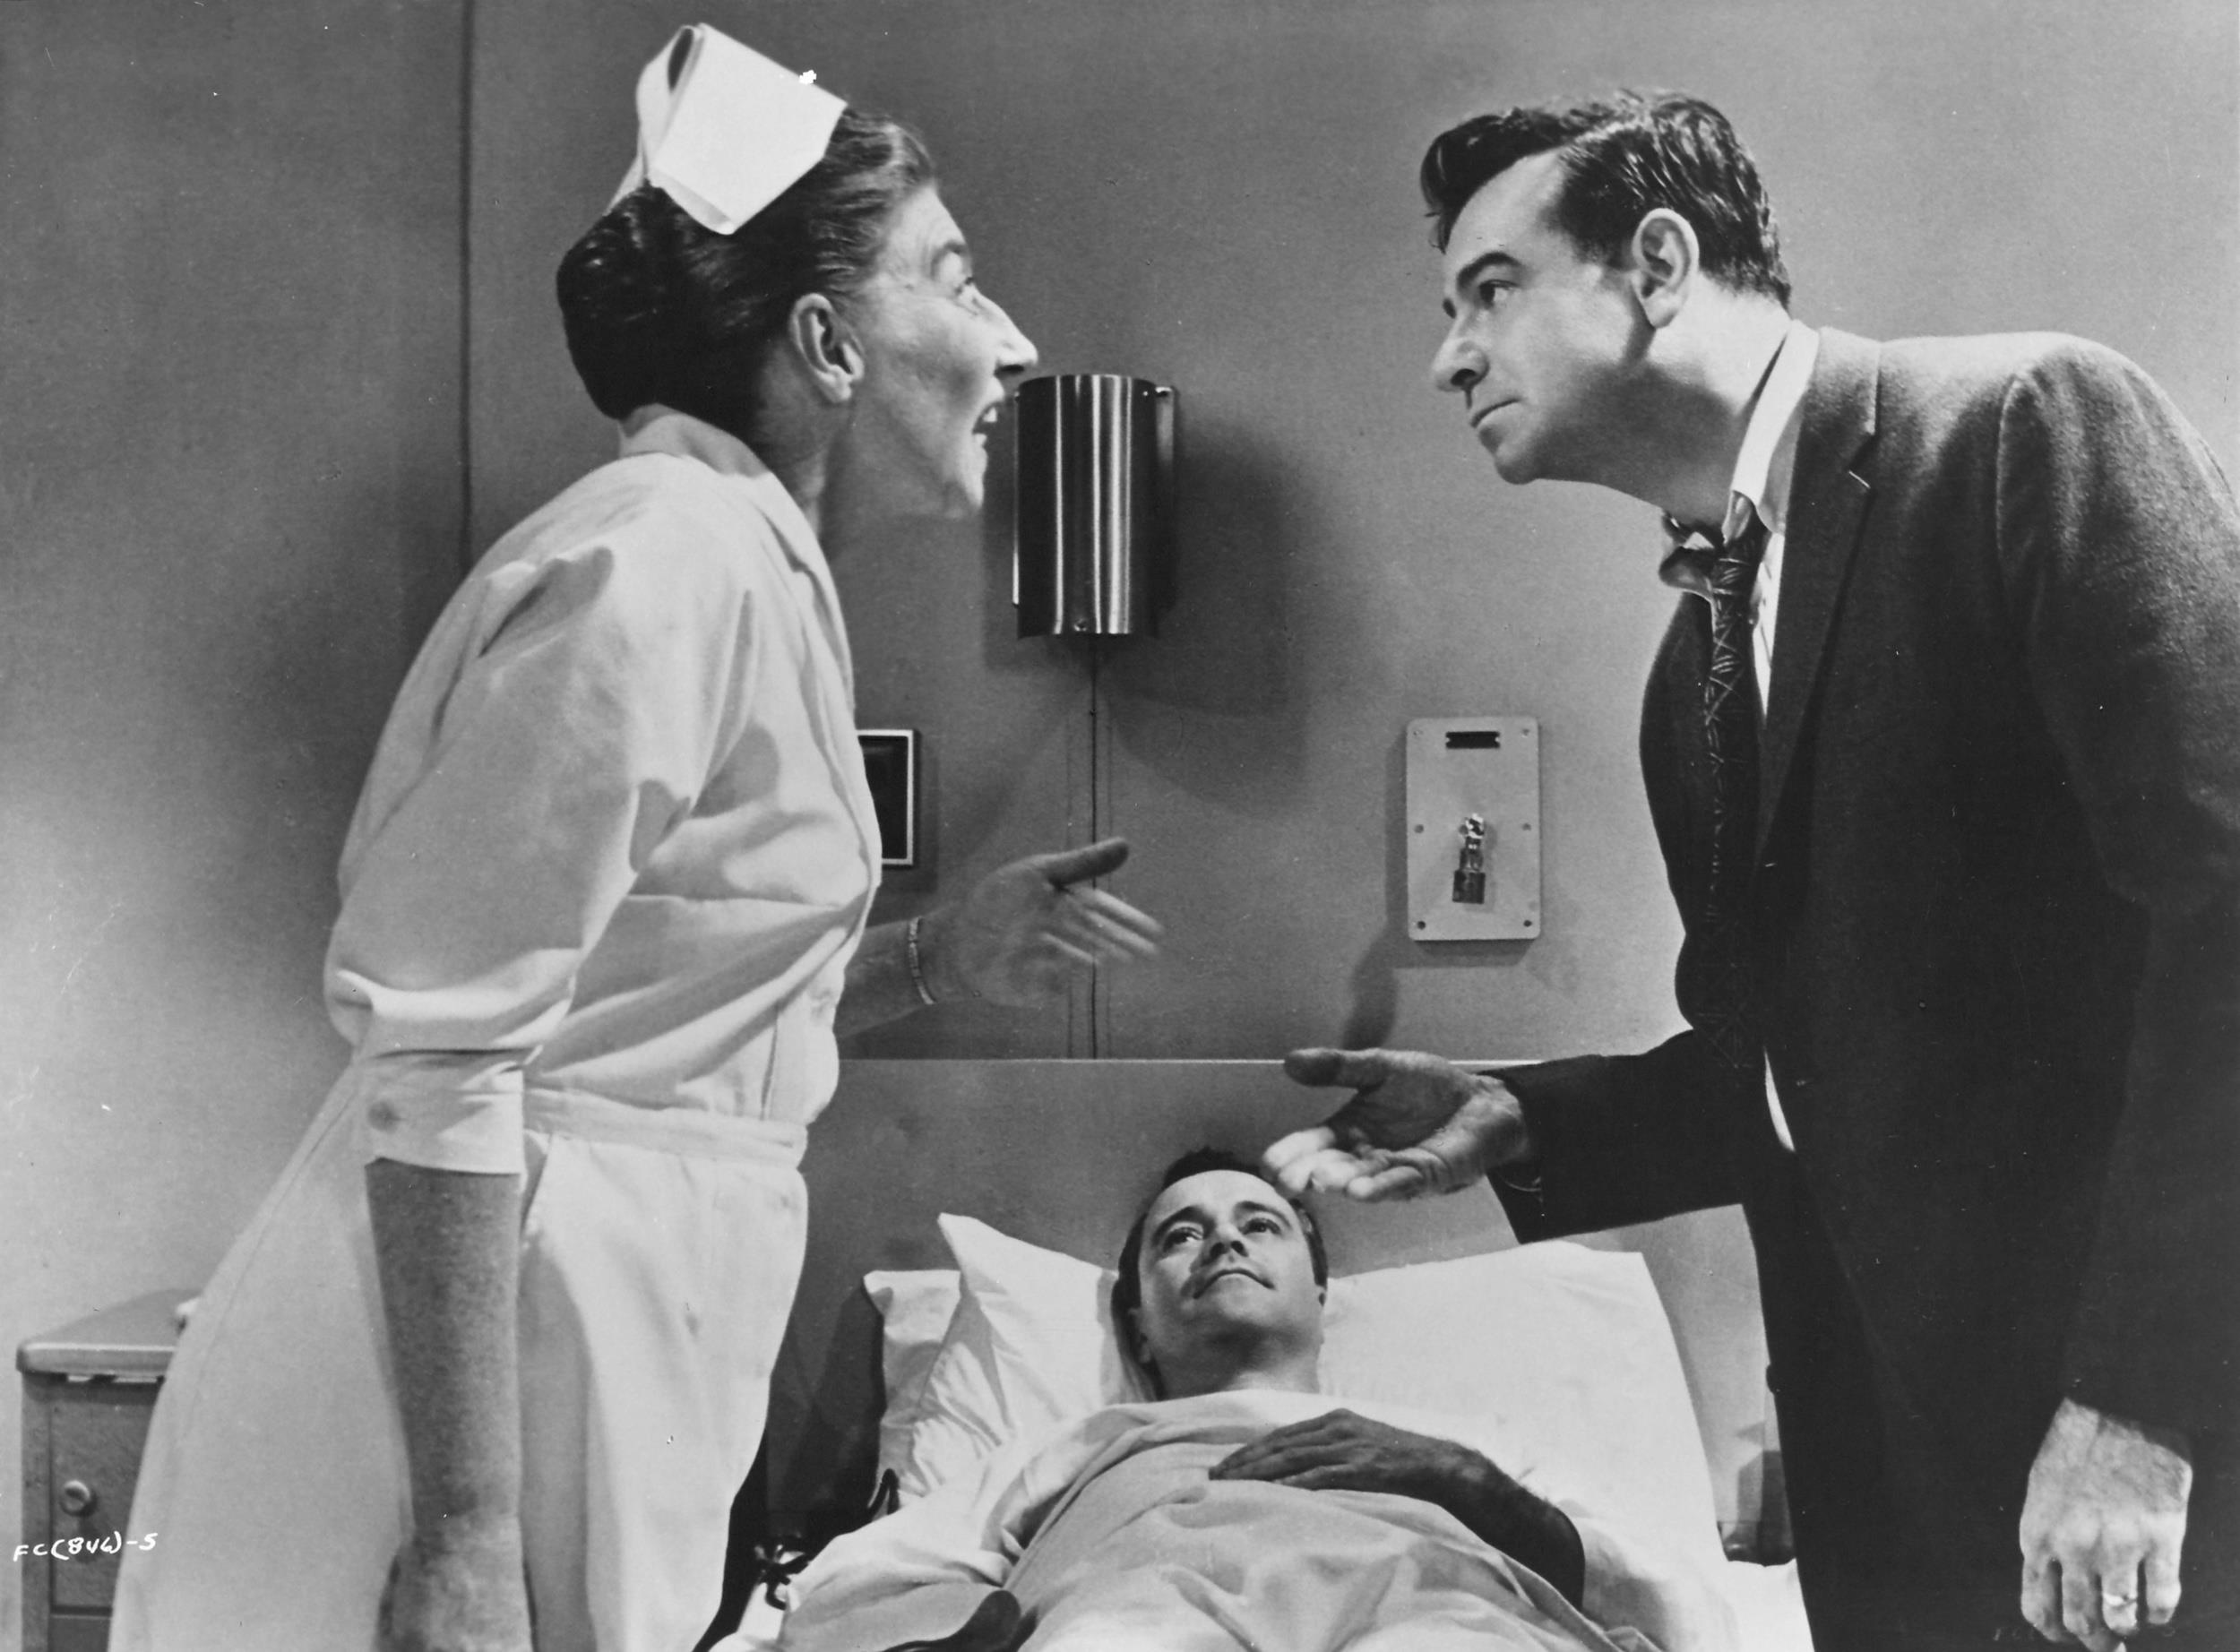 <p>If you had to name the one performance that earned Walter Matthau his only Academy Award, you’d probably guess “The Odd Couple”, “A New Leaf” or maybe his two-hander triumph with George Burns in “The Sunshine Boys”. Nope. It was as the scheming ambulance chasing lawyer, William “Whiplash Willie” Gingrich (great last name!), Billy Wilder’s perennially underrated black comedy, “The Fortune Cookie”. Willie convinces his good-hearted brother-in-law (Jack Lemmon) to file a personal injury lawsuit against the star running back of the Cleveland Browns (Ron Rich) when the player accidentally plows into him on the sidelines of a game. You’ve seen Matthau do the likable lout bit before, but this is one of Wilder and I.A.L. Diamond’s meanest and funniest concoctions. They should’ve set aside an Oscar for Matthau ever year just for being Walter Matthau, but we’ll settle for this richly deserved Best Supporting Actor trophy.</p><p>You may also like: <a href='https://www.yardbarker.com/entertainment/articles/the_best_tv_character_rivalries/s1__35606663'>The best TV character rivalries</a></p>